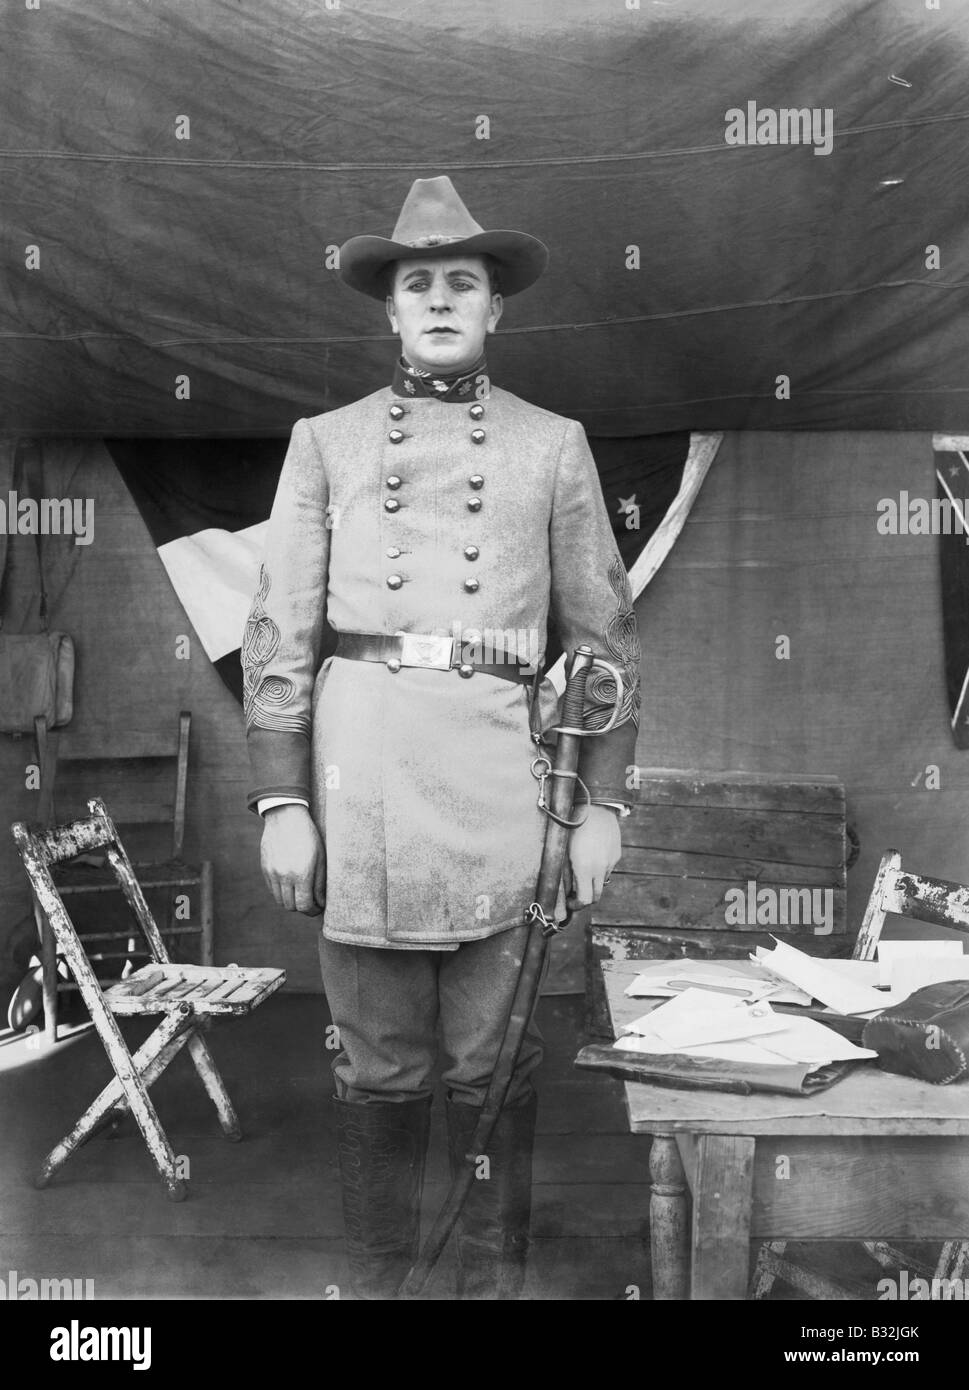 CONFEDERATE OFFICER Stockfoto